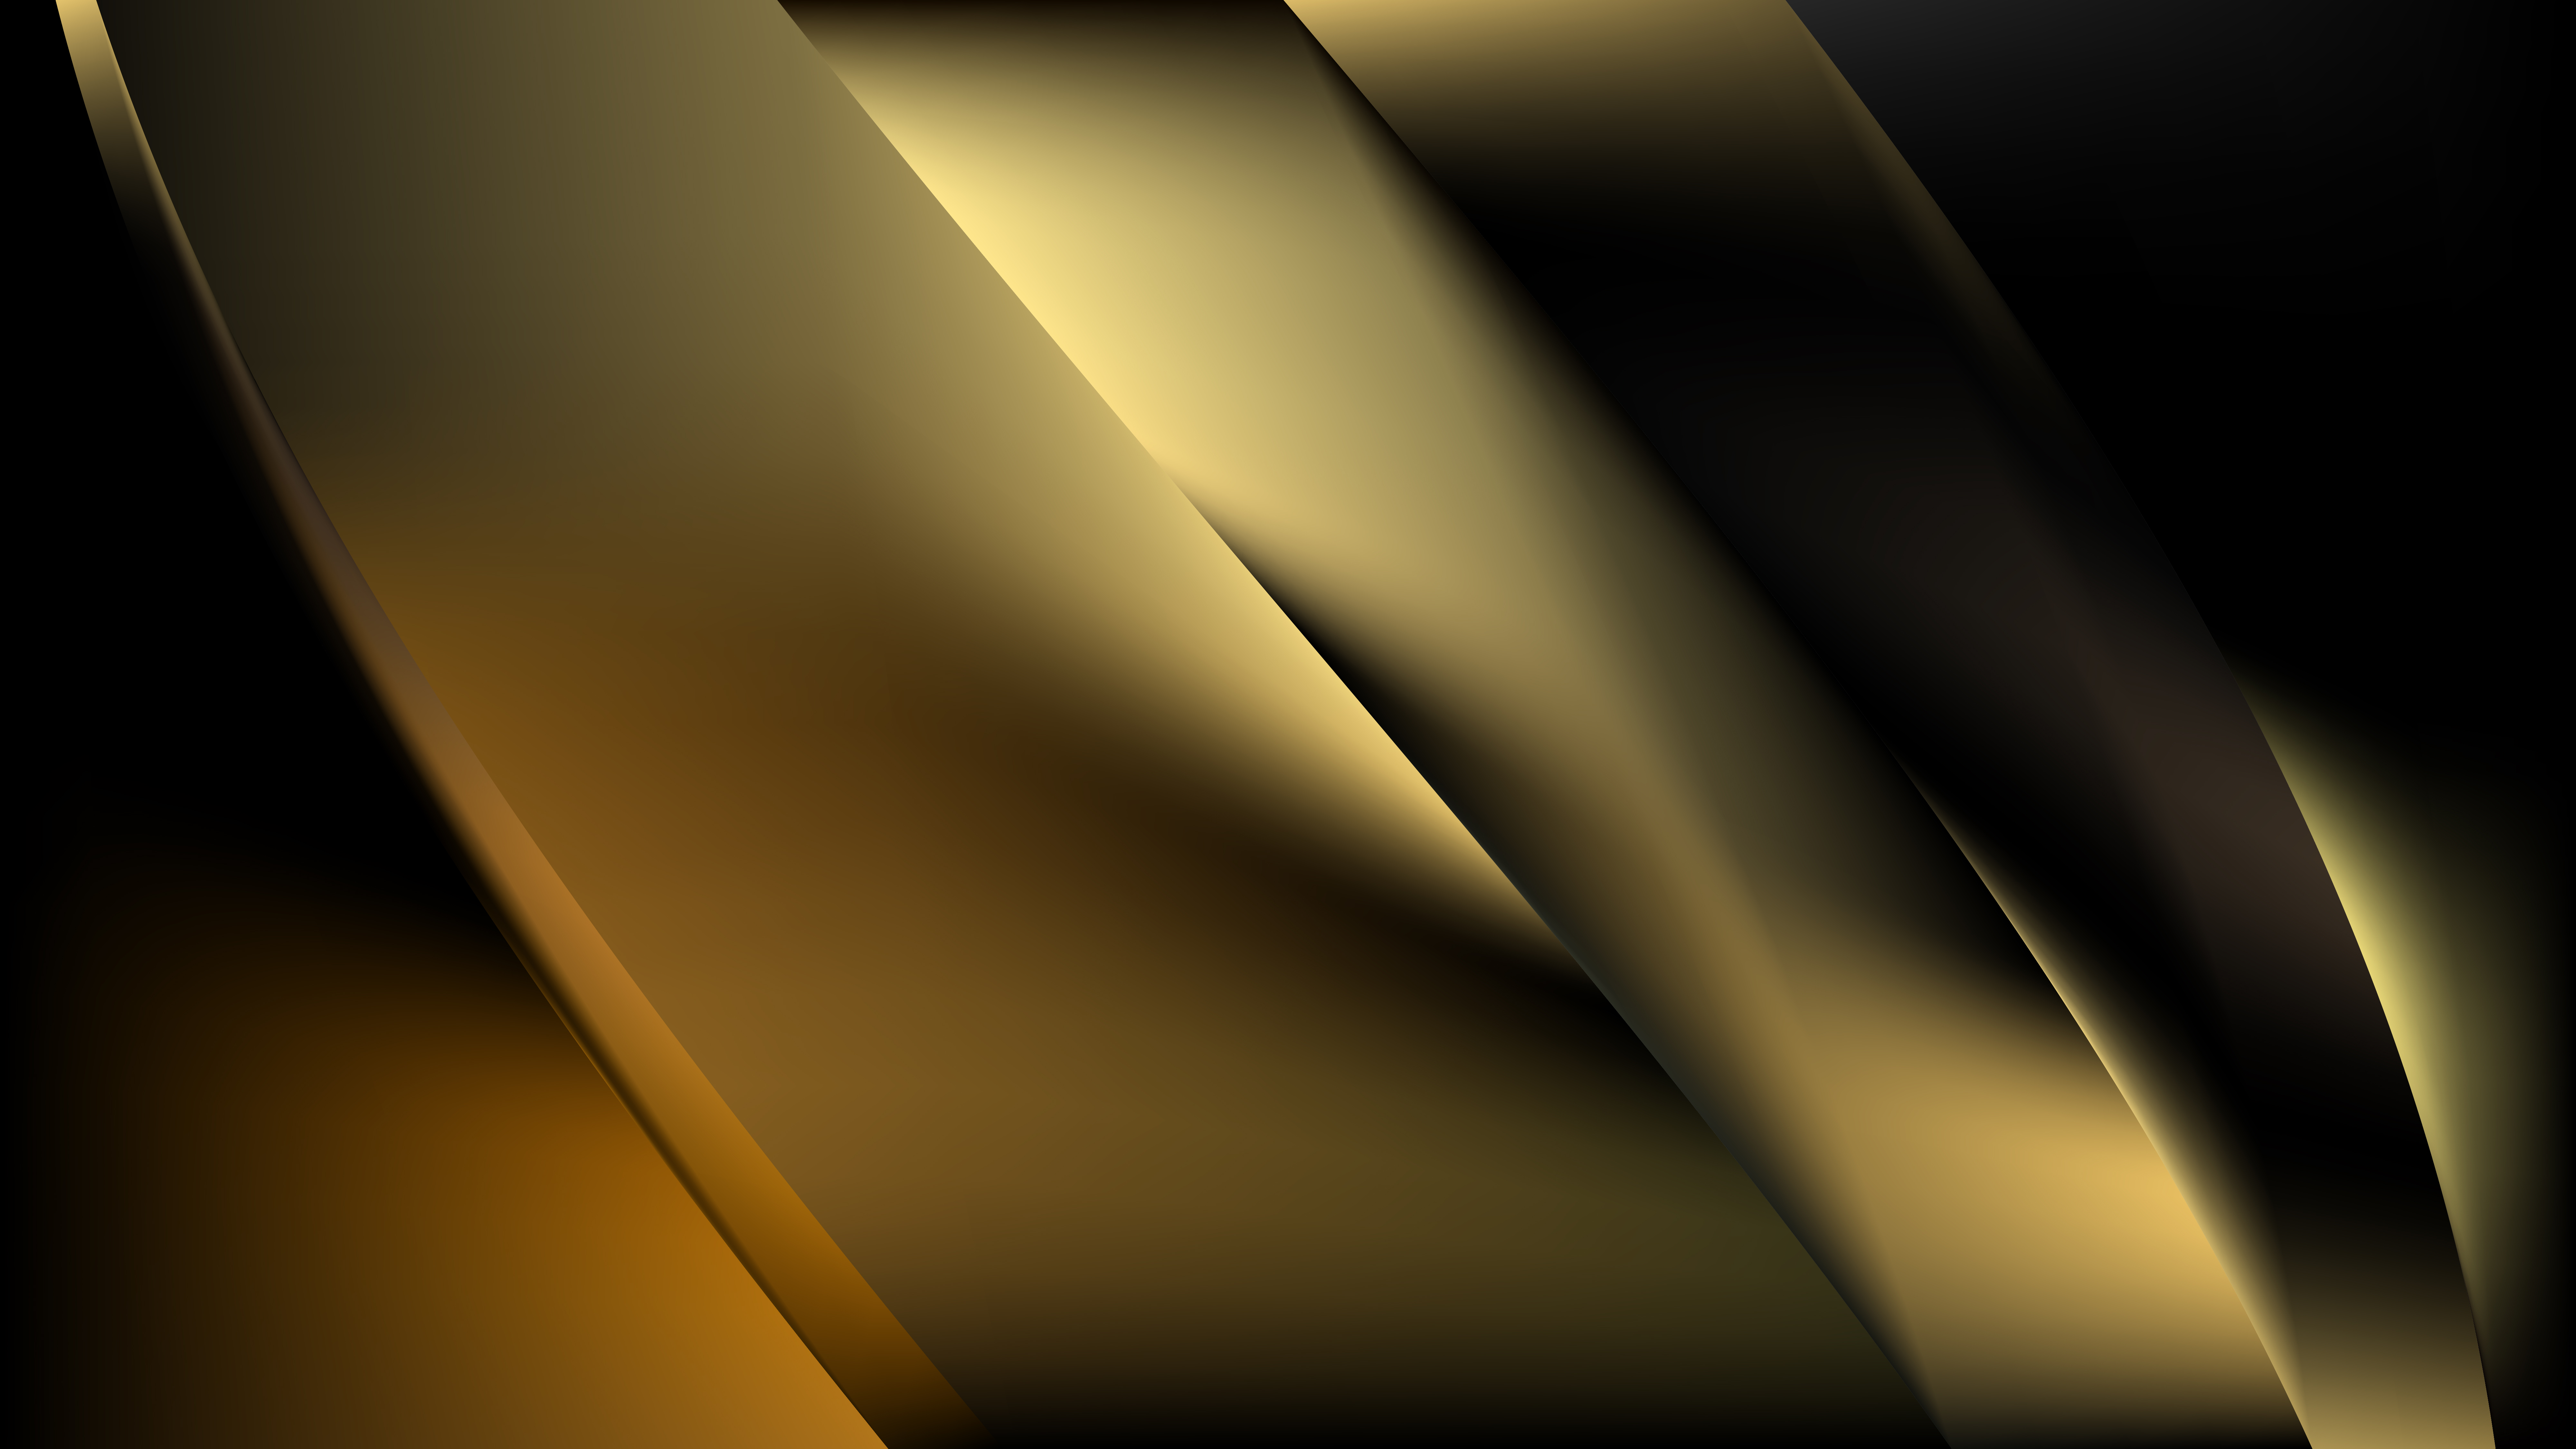 Black and gold background Royalty Free Vector Image